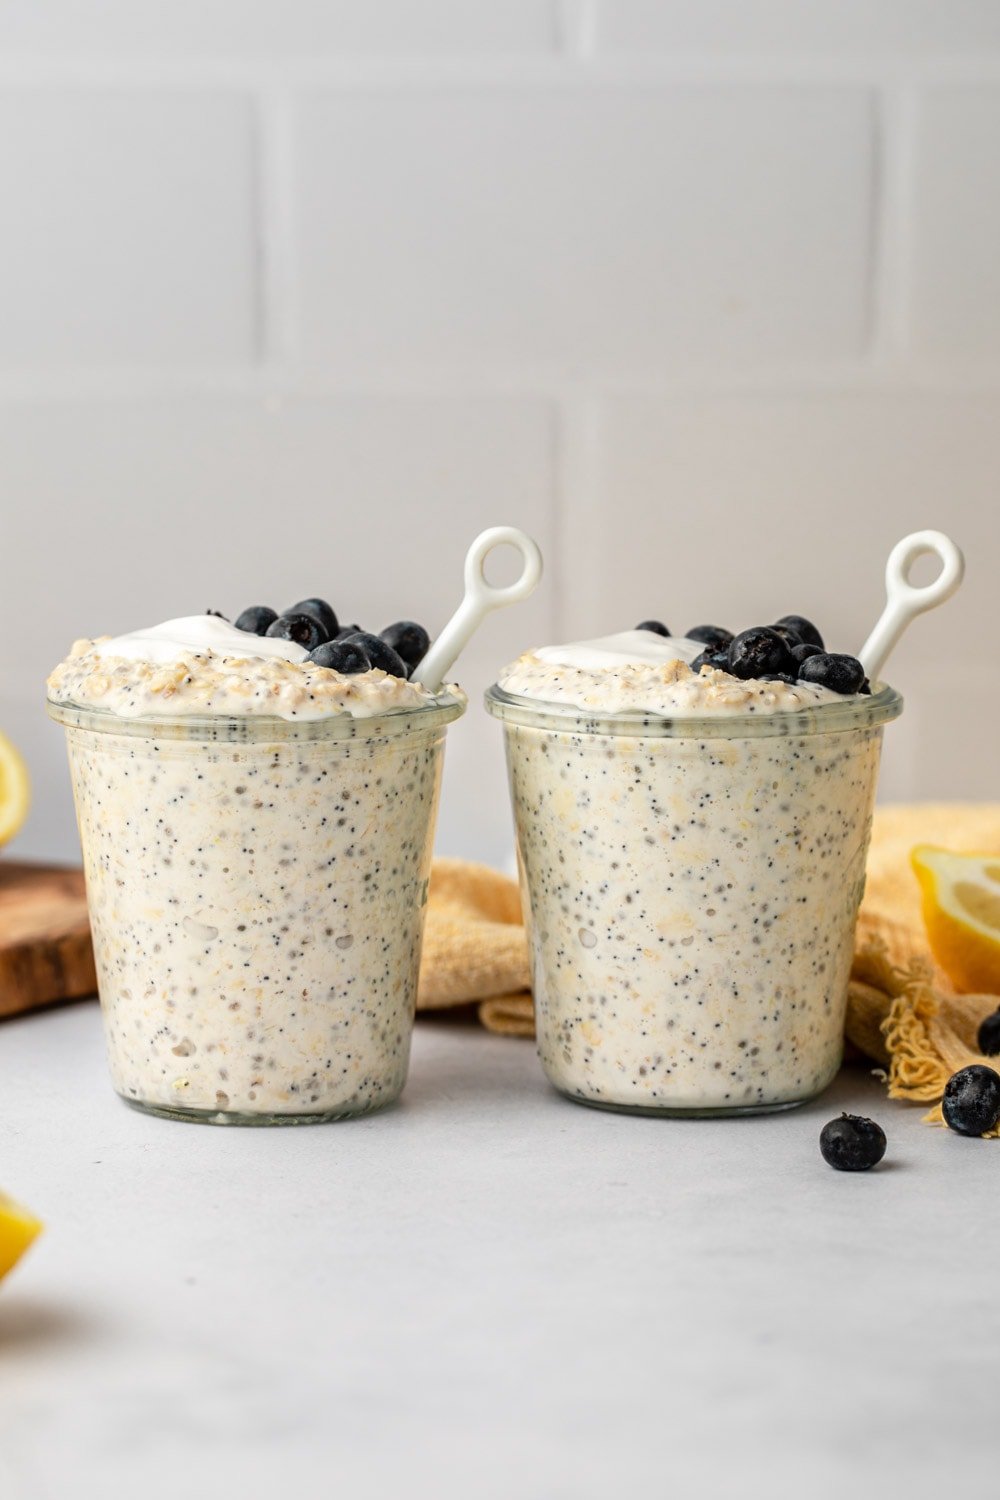 overnight oats served in two cups topped with blueberries and yoghurt